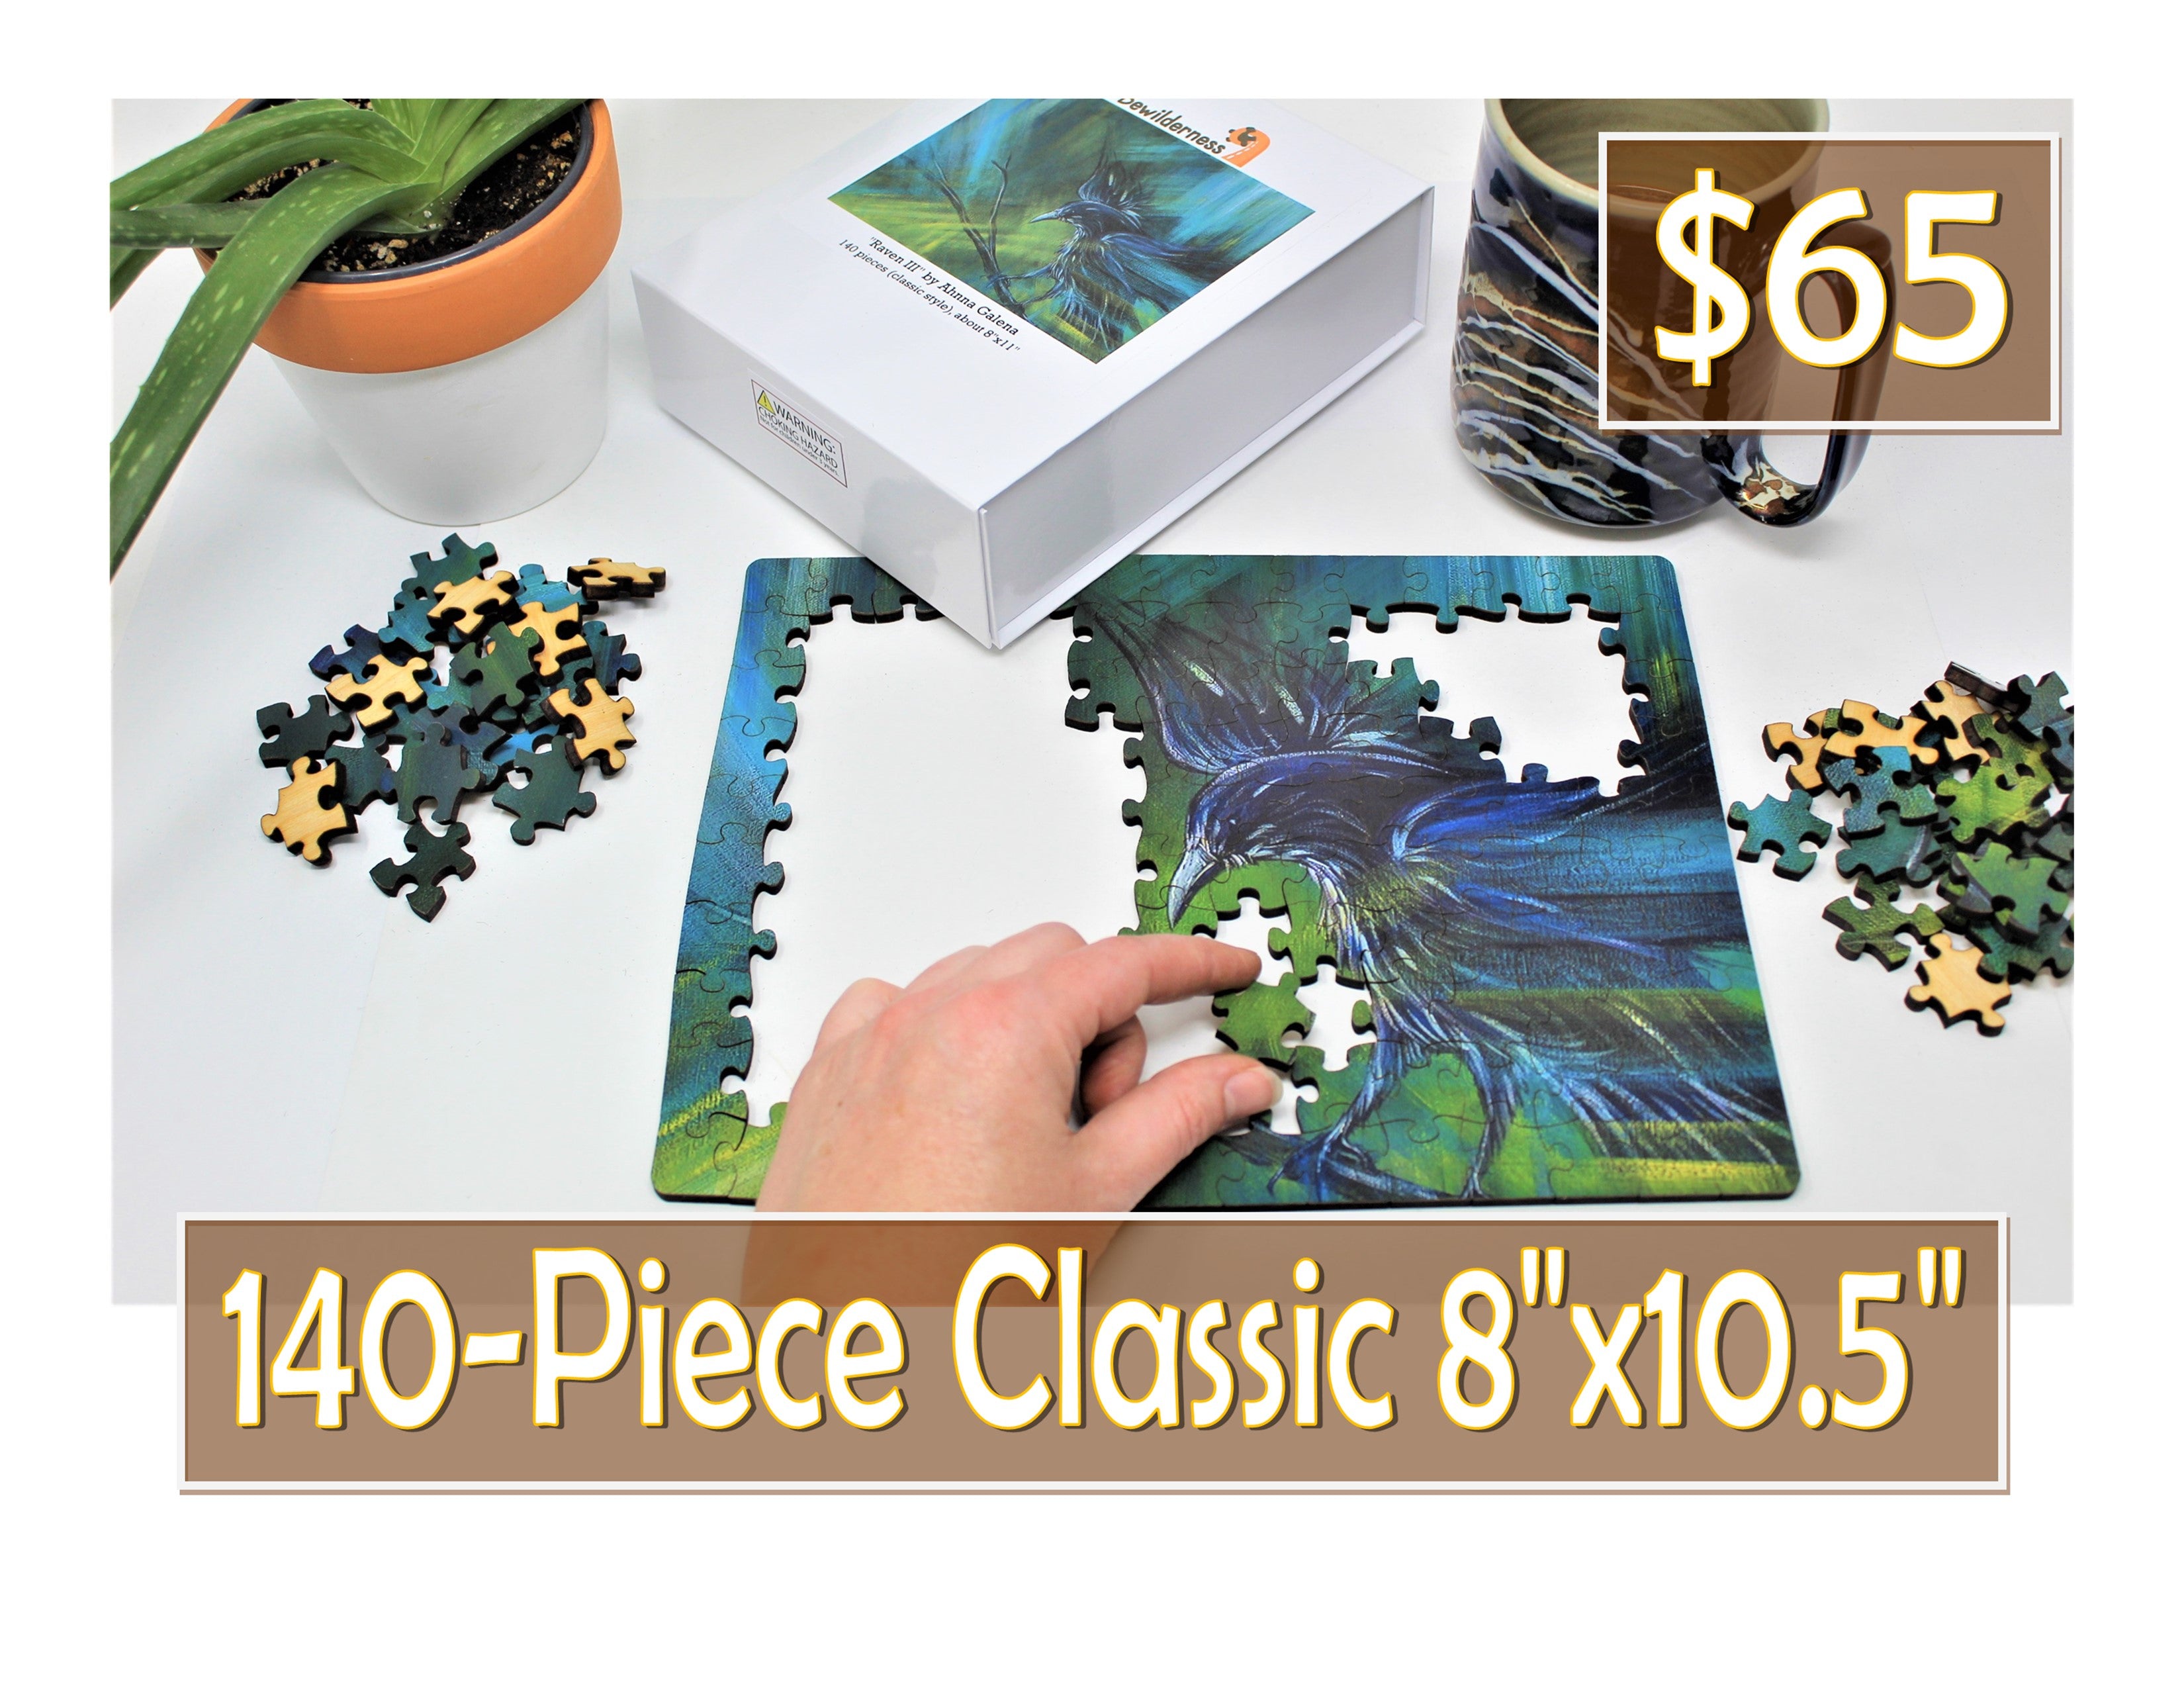 Custom Puzzle - 50-375 pieces, Choose Image, Size, and Cut Pattern